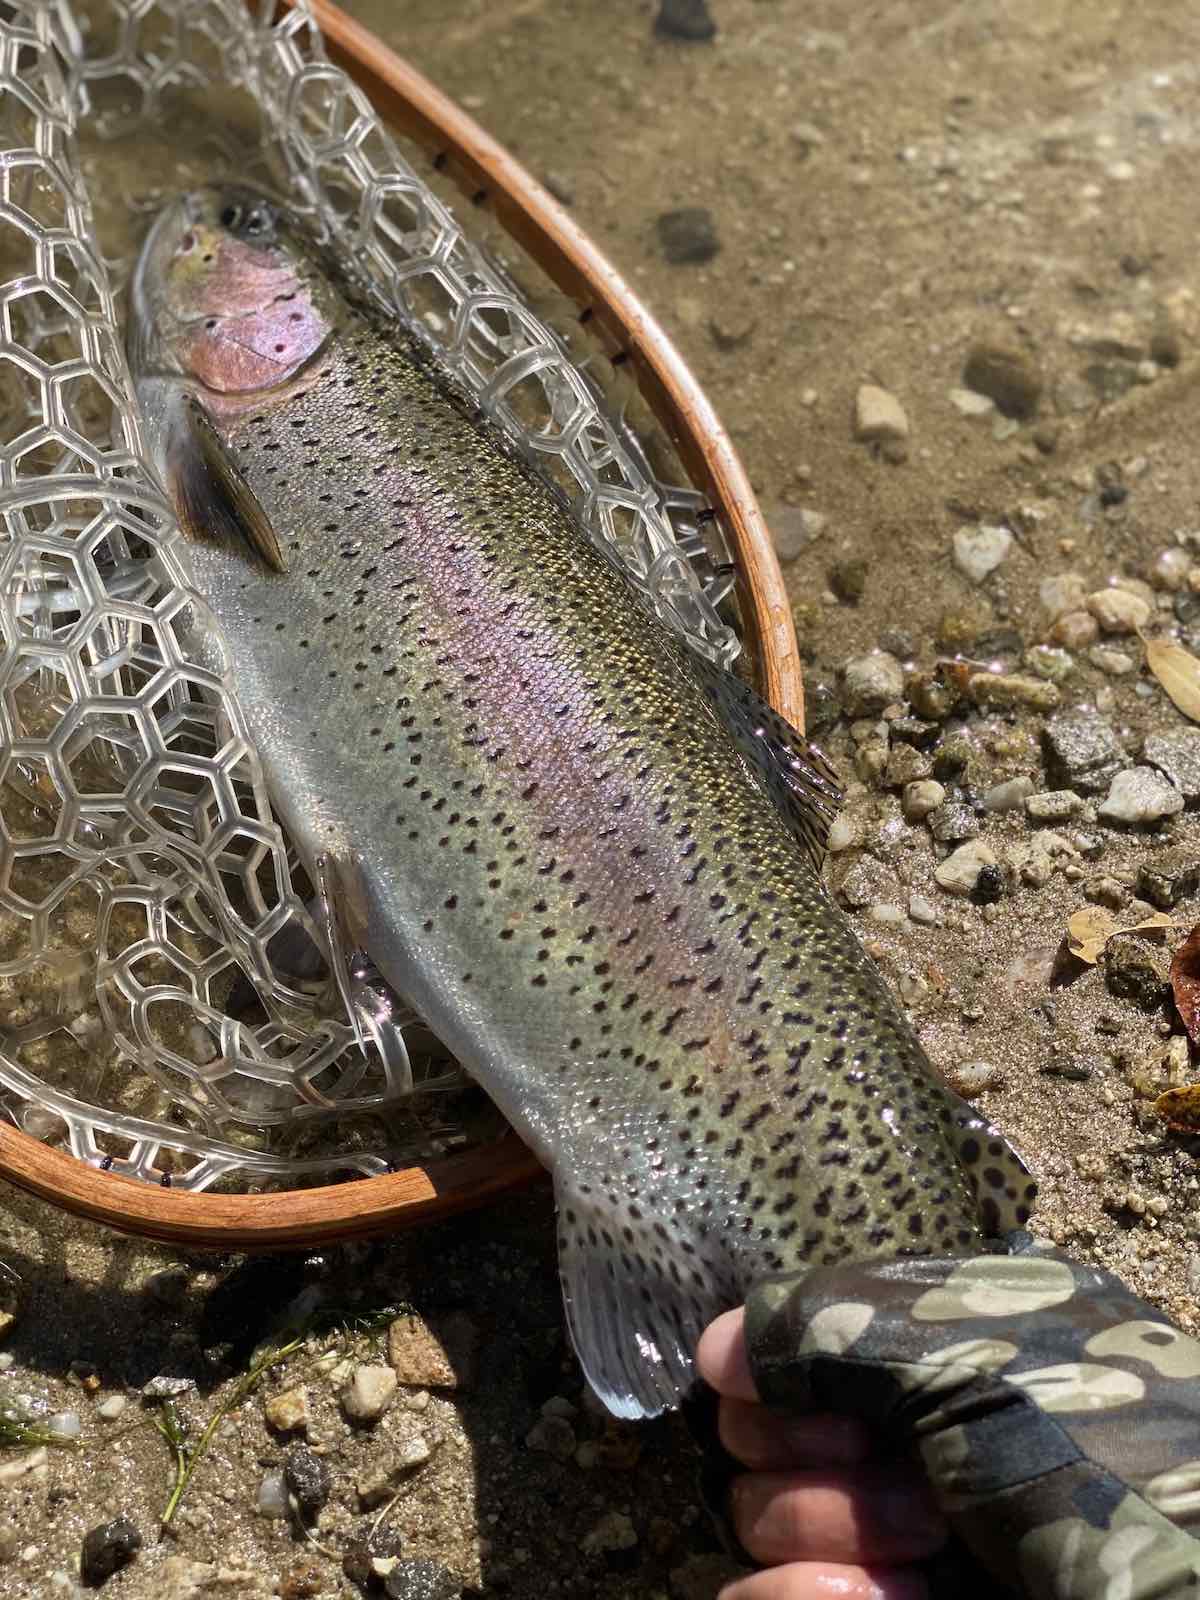 Rainbow trout caught in net while fishing on river using flies